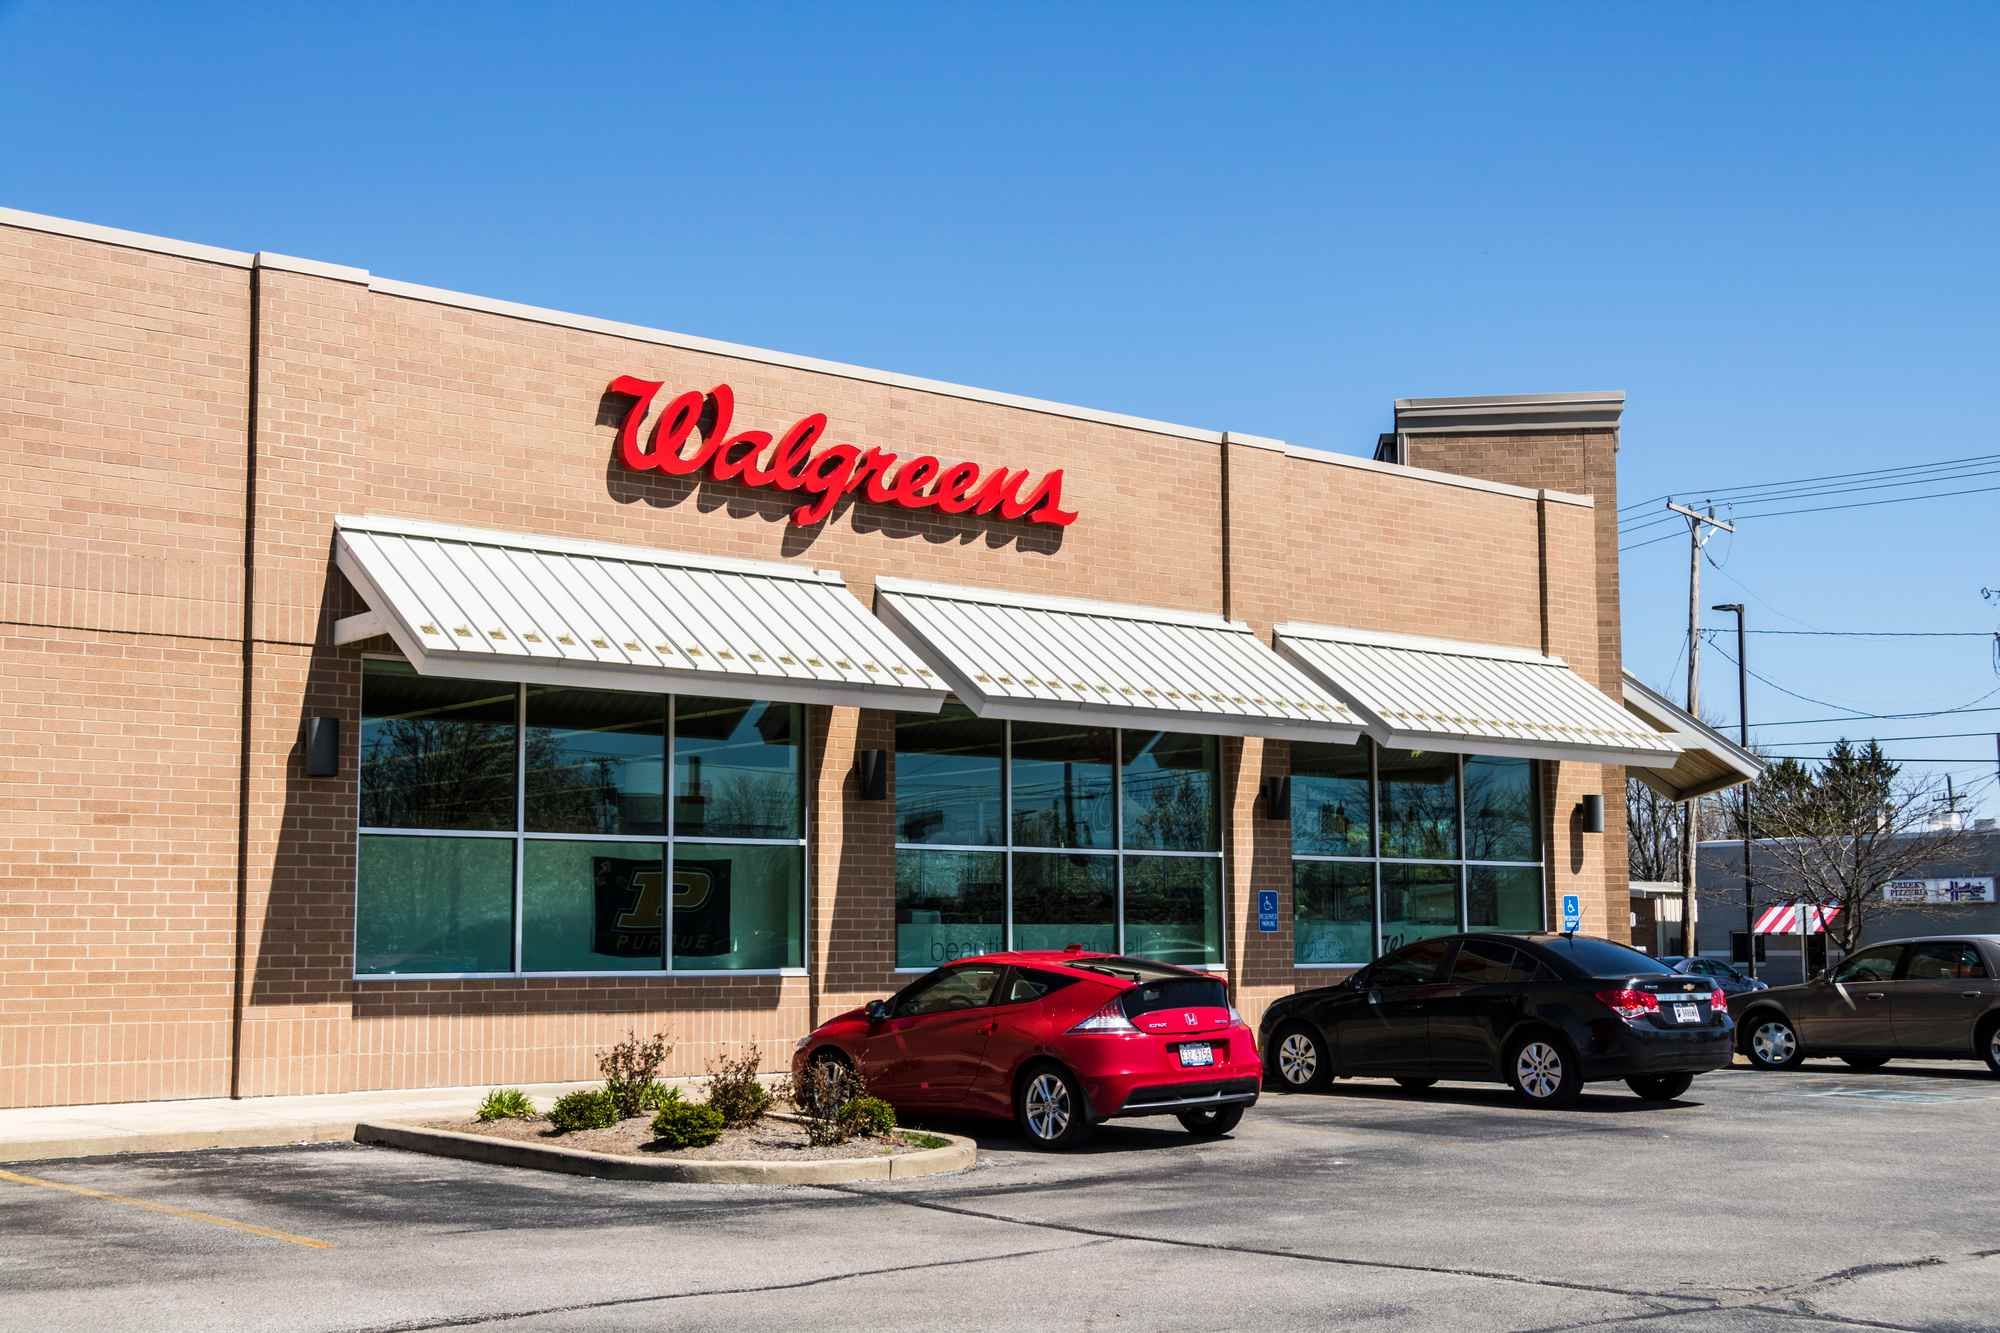 Walgreens class action lawsuit over poorly performing 401(k)